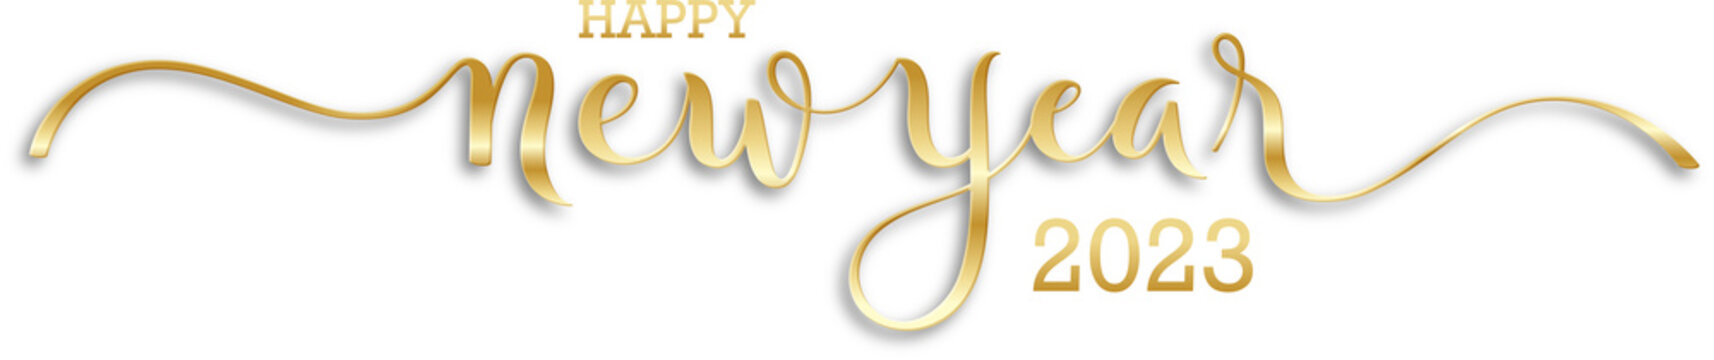 HAPPY NEW YEAR 2023 metallic gold calligraphy banner on transparent background